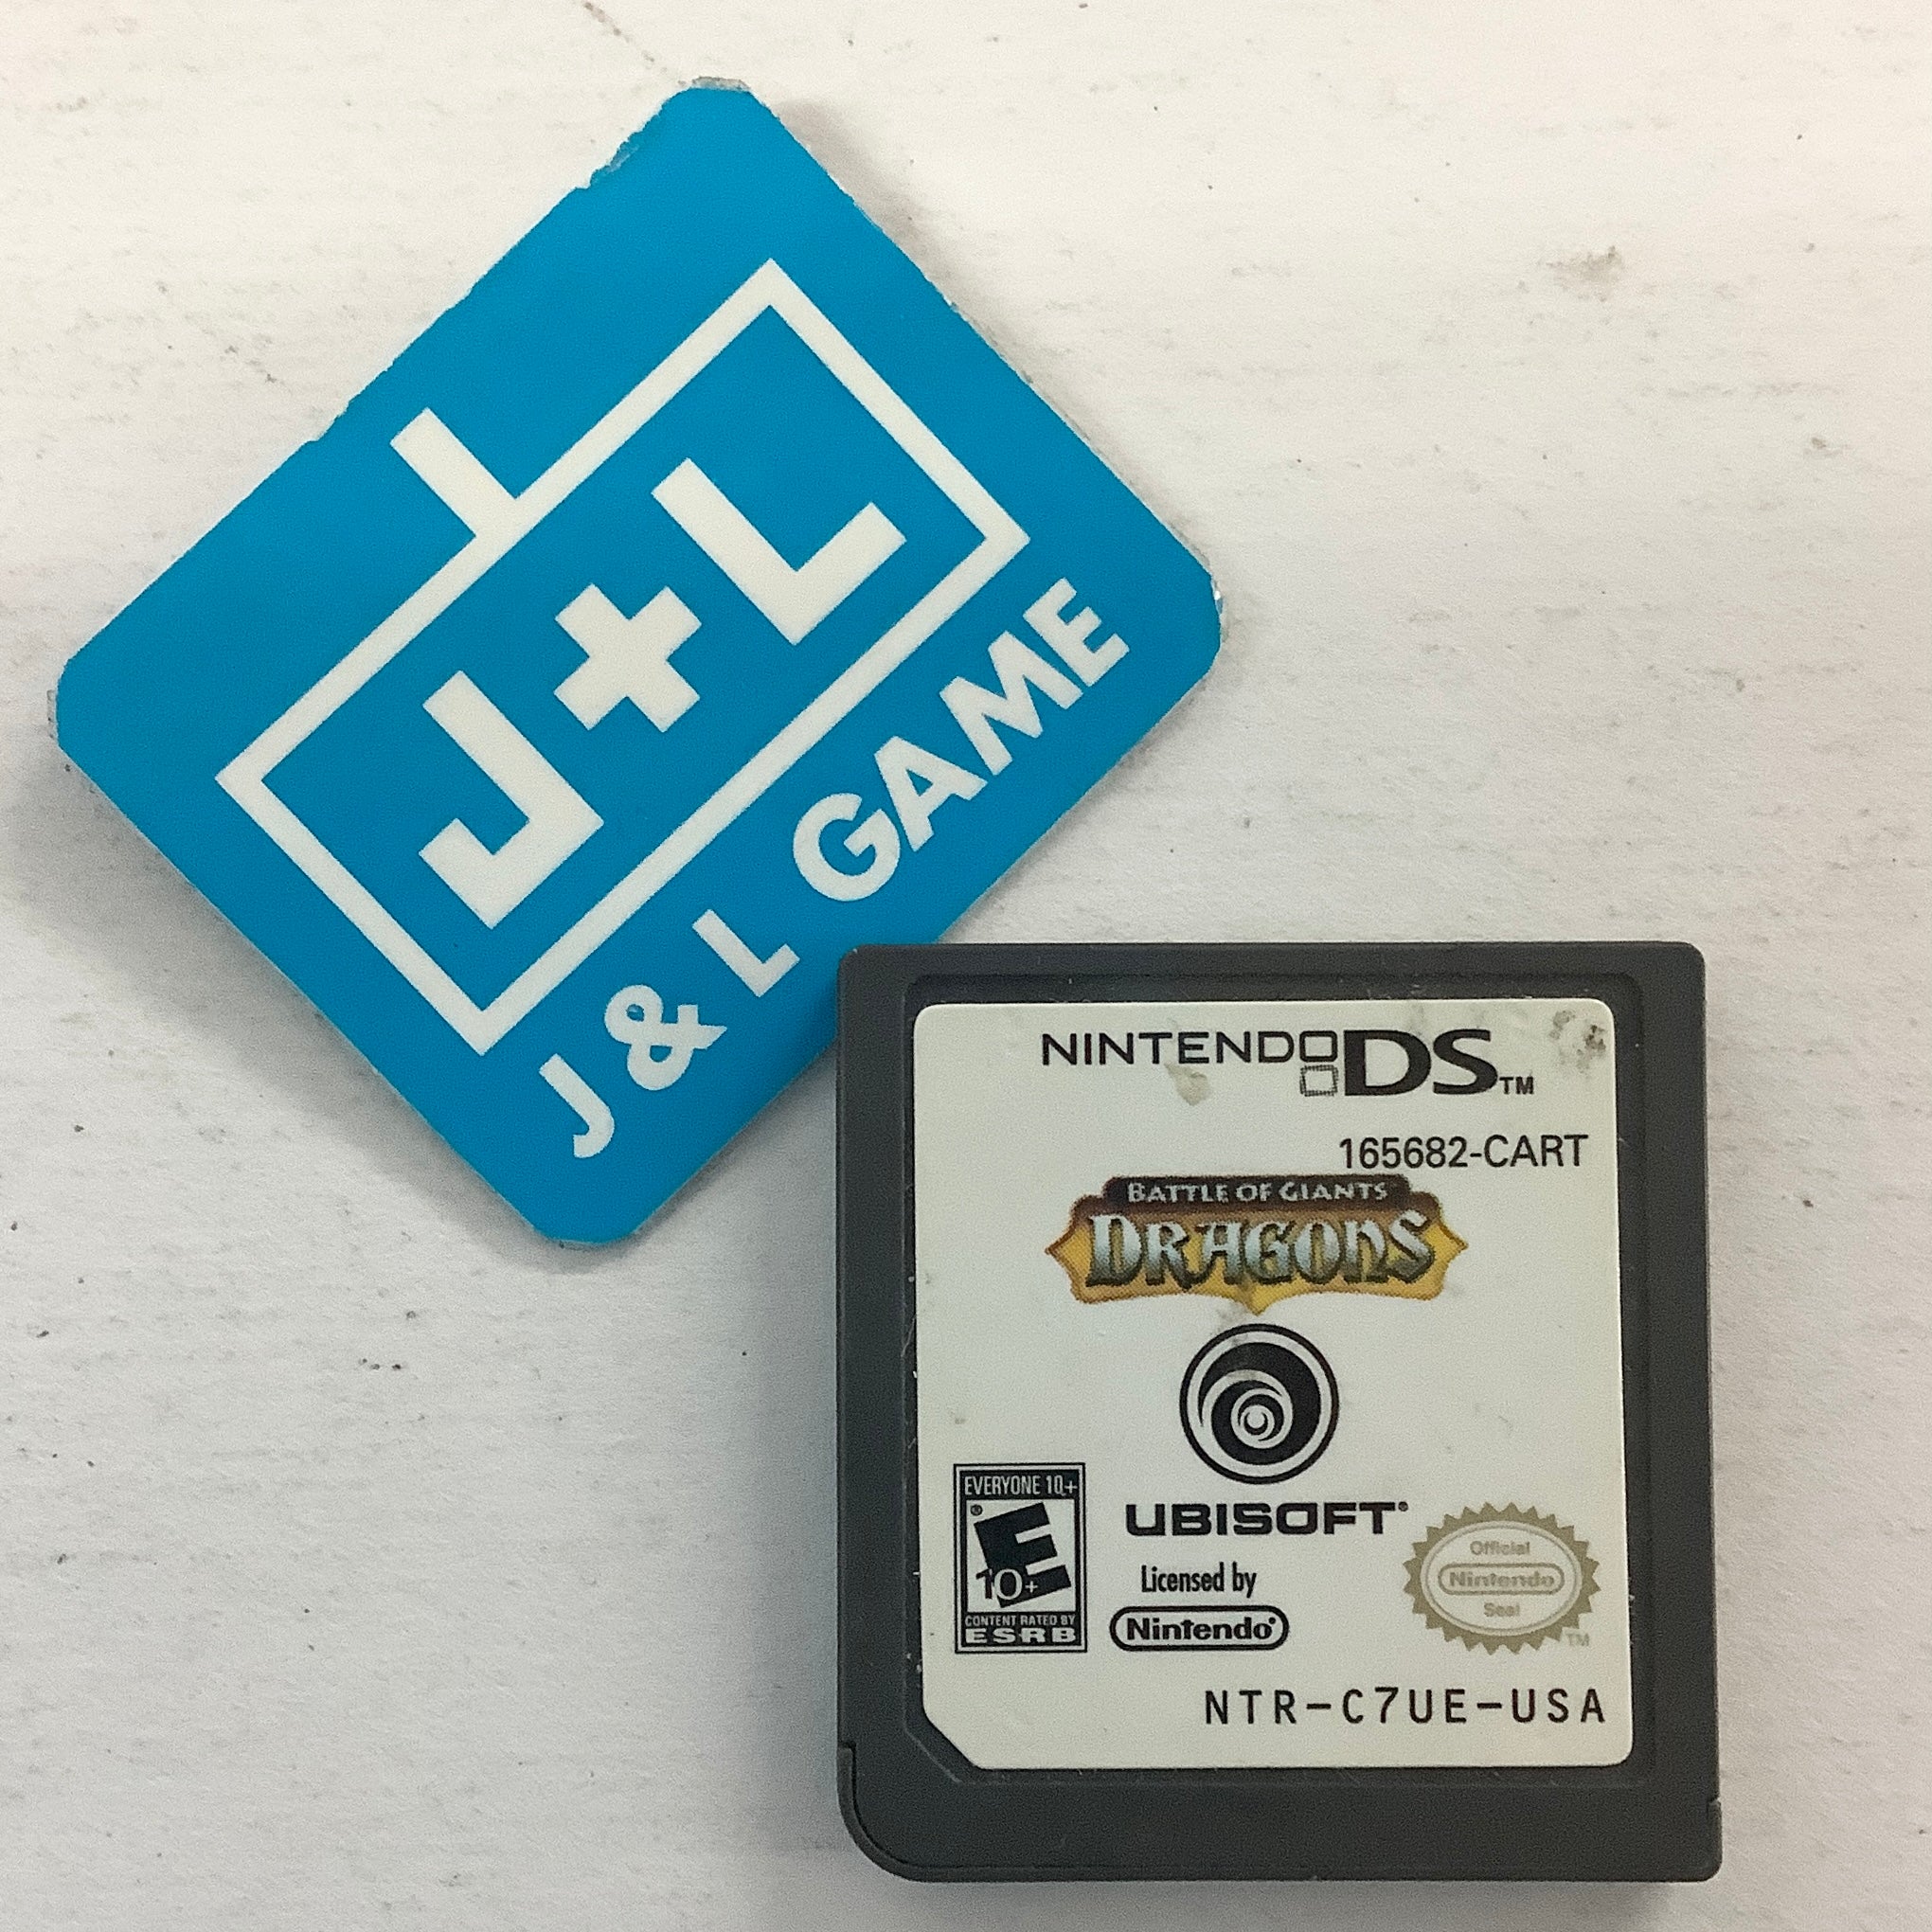 Battle of Giants: Dragons - (NDS) Nintendo DS [Pre-Owned]